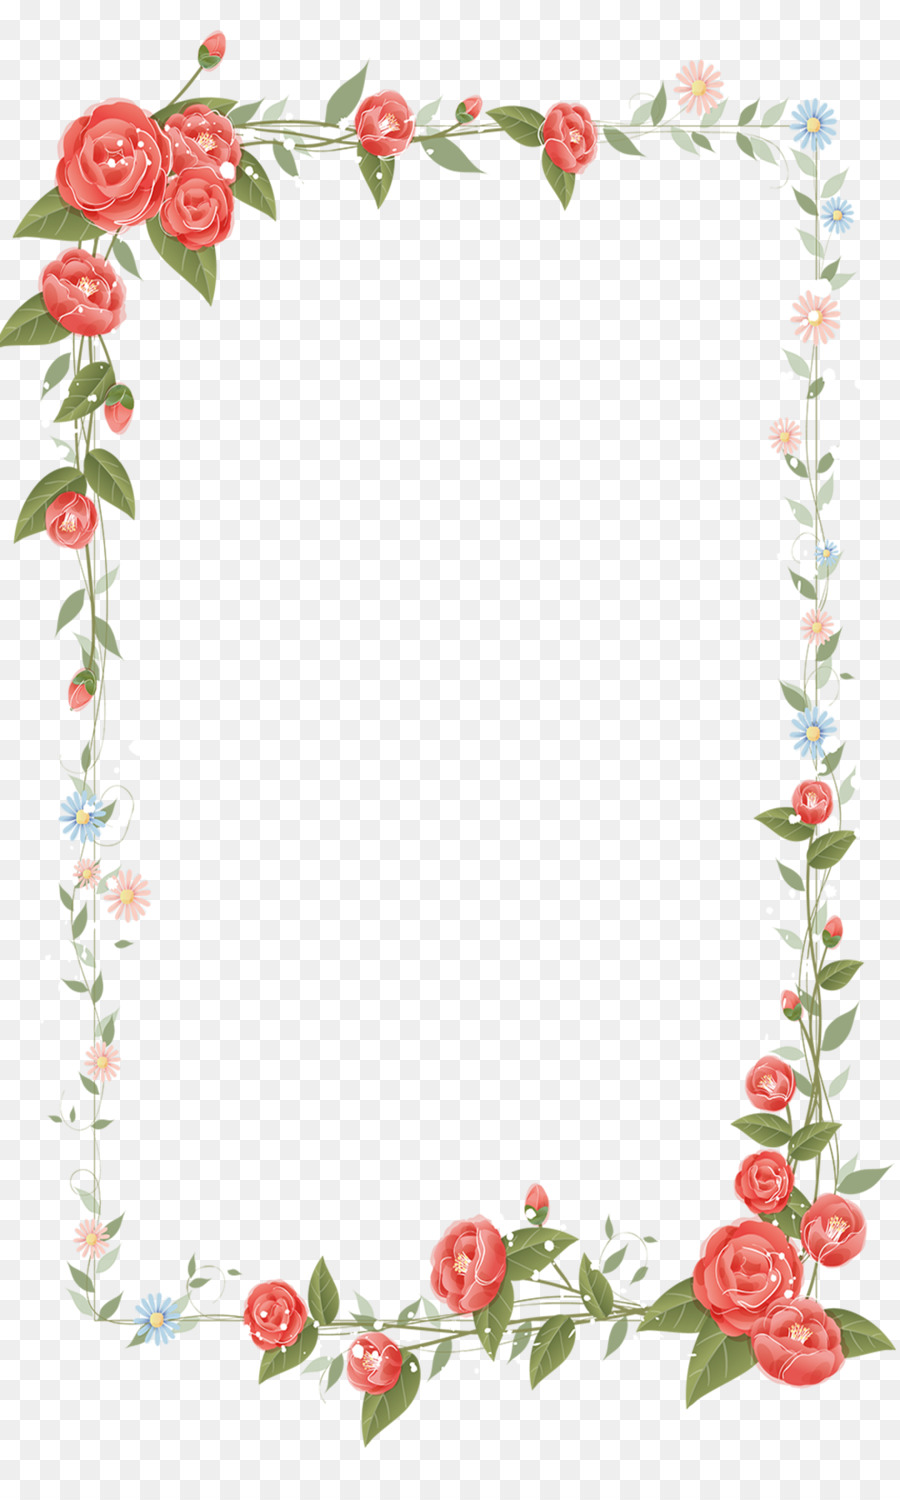 Border Flowers Drawing Clip art - Hand painted flower borders png download - 1080*1788 - Free Transparent Border Flowers png Download.